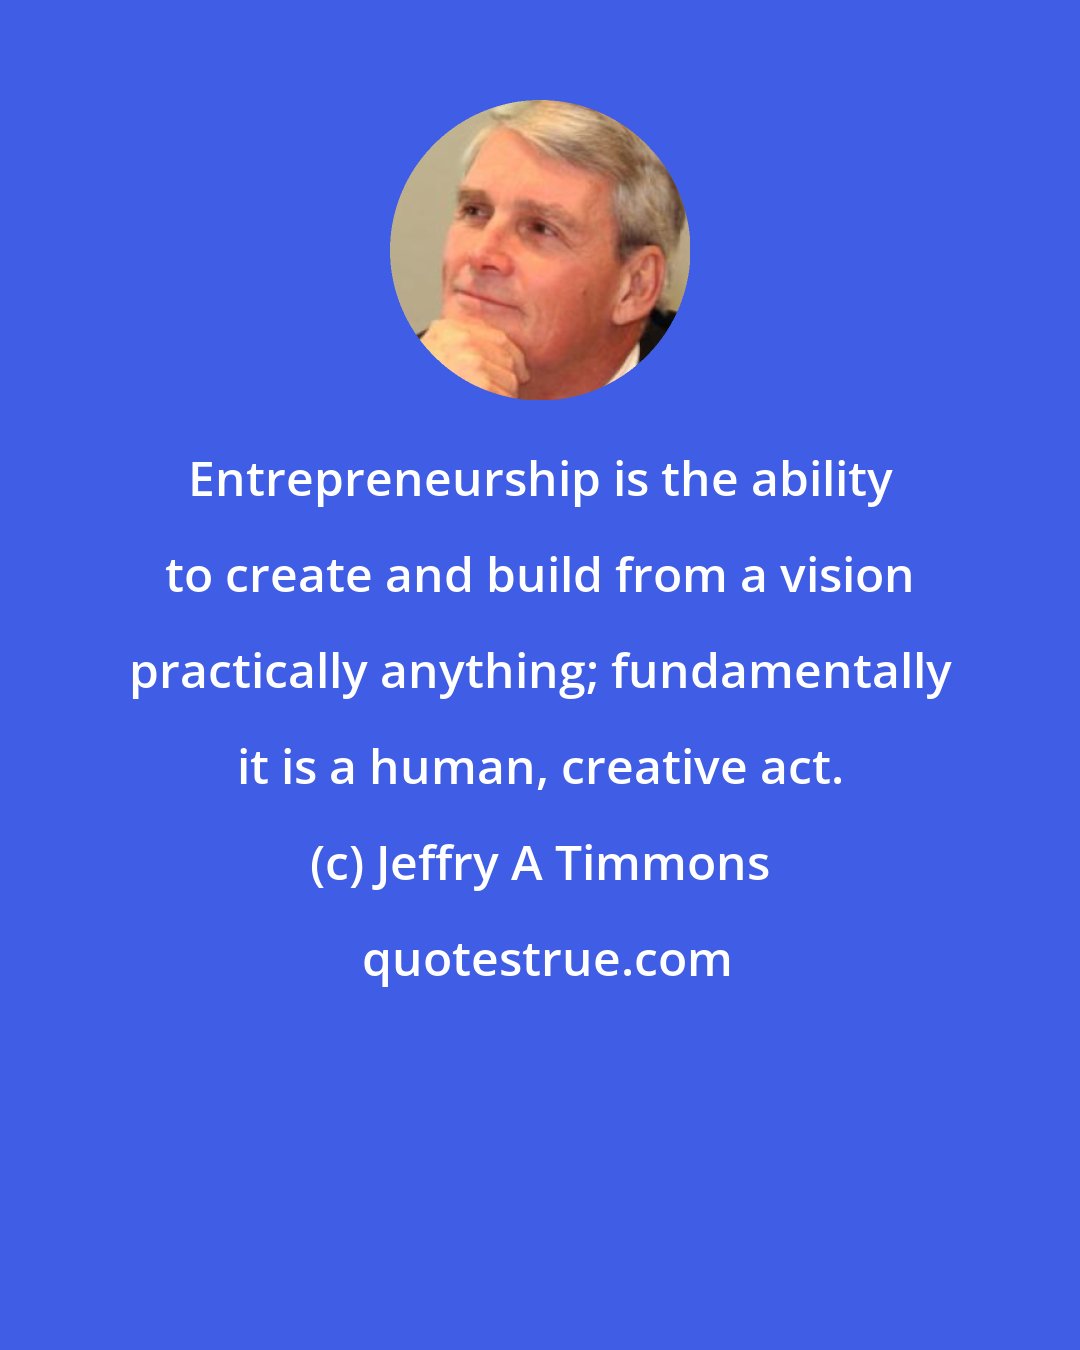 Jeffry A Timmons: Entrepreneurship is the ability to create and build from a vision practically anything; fundamentally it is a human, creative act.